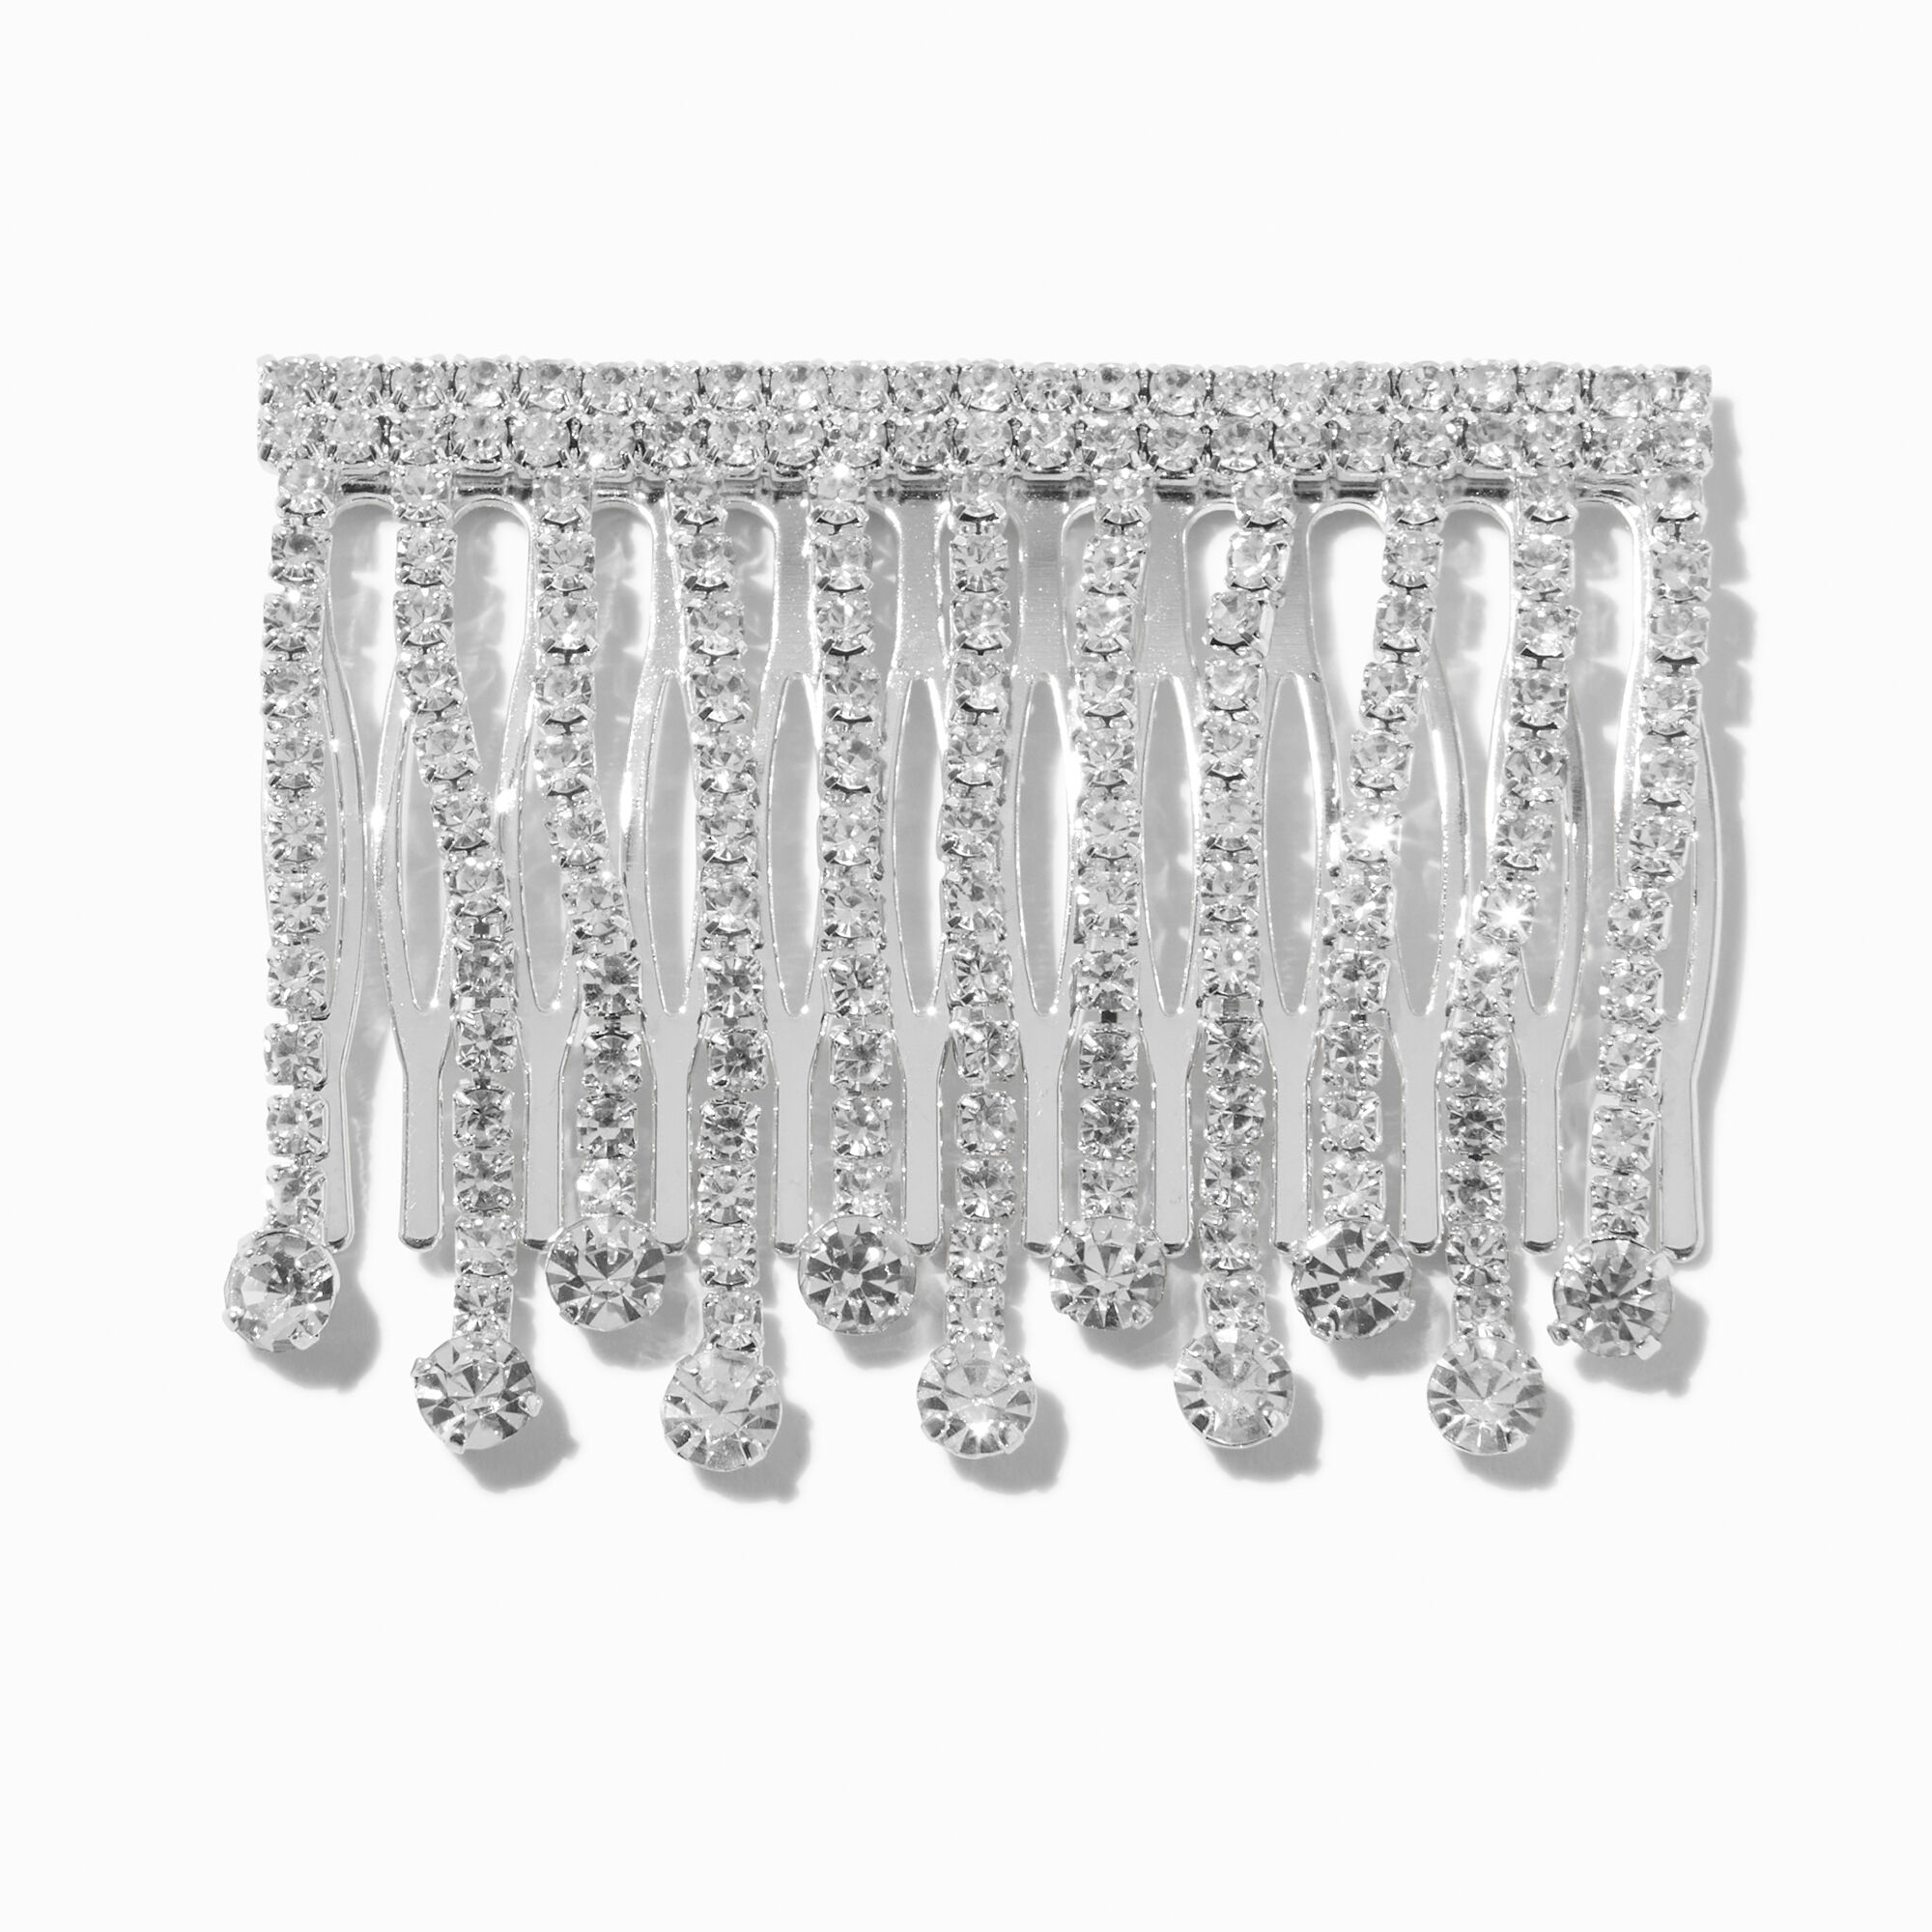 View Claires Tone Rhinestone Fringe Hair Comb Silver information